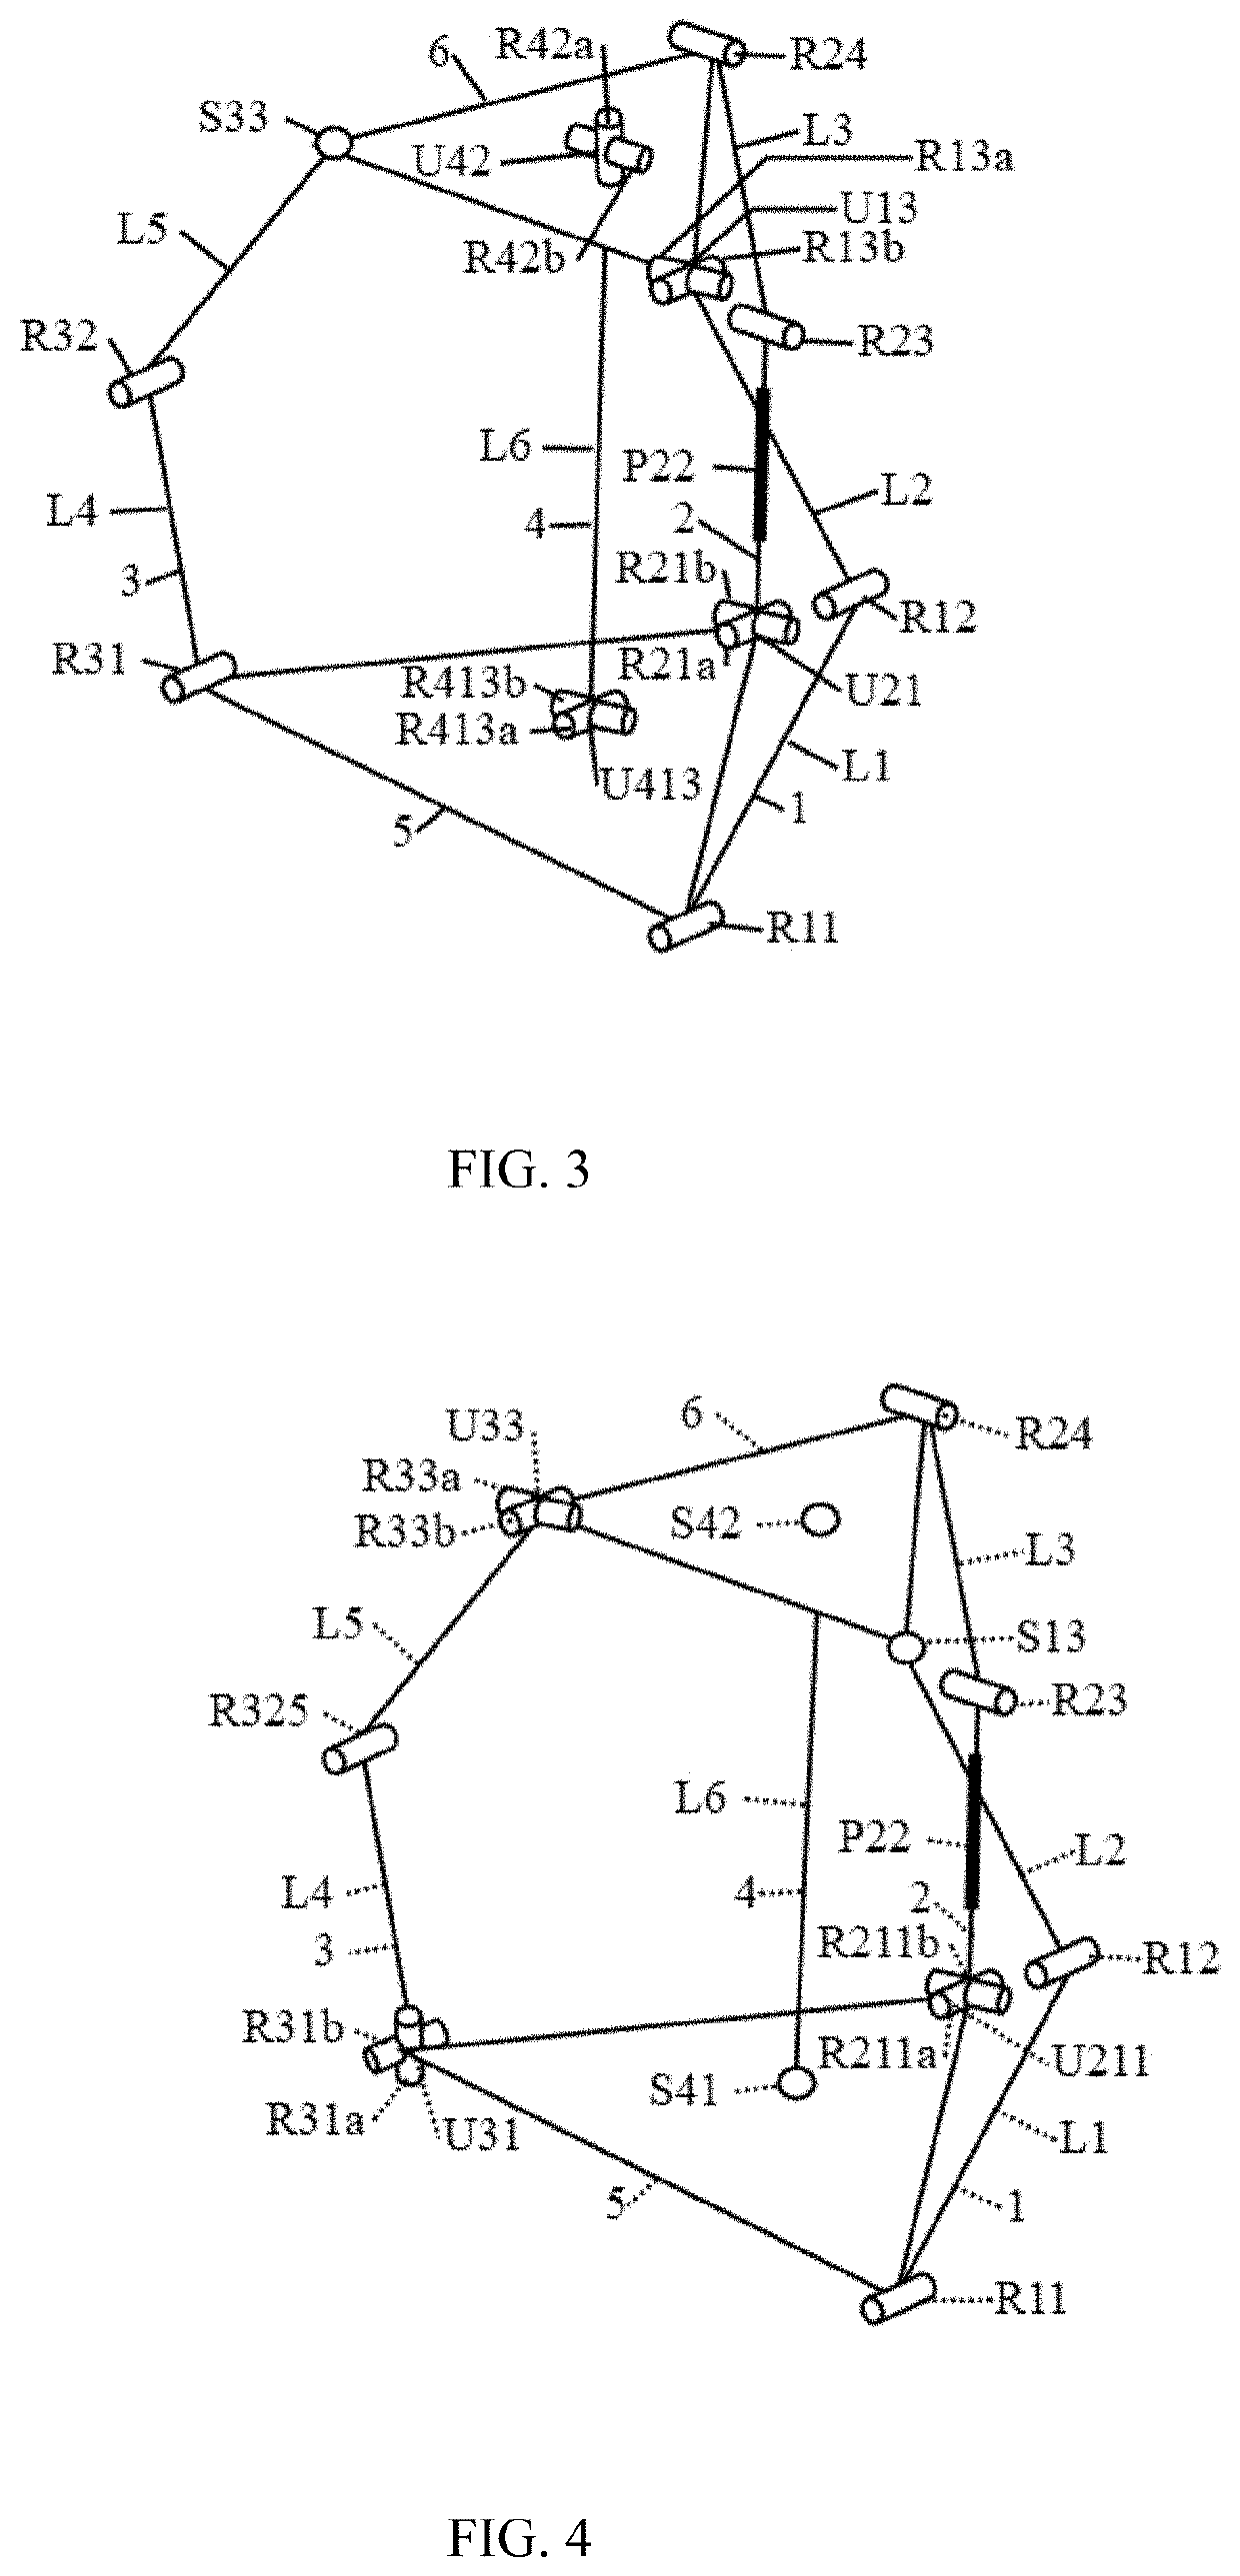 Class of Over-Constrained Two-Rotation Parallel Mechanism with Same Kinematics